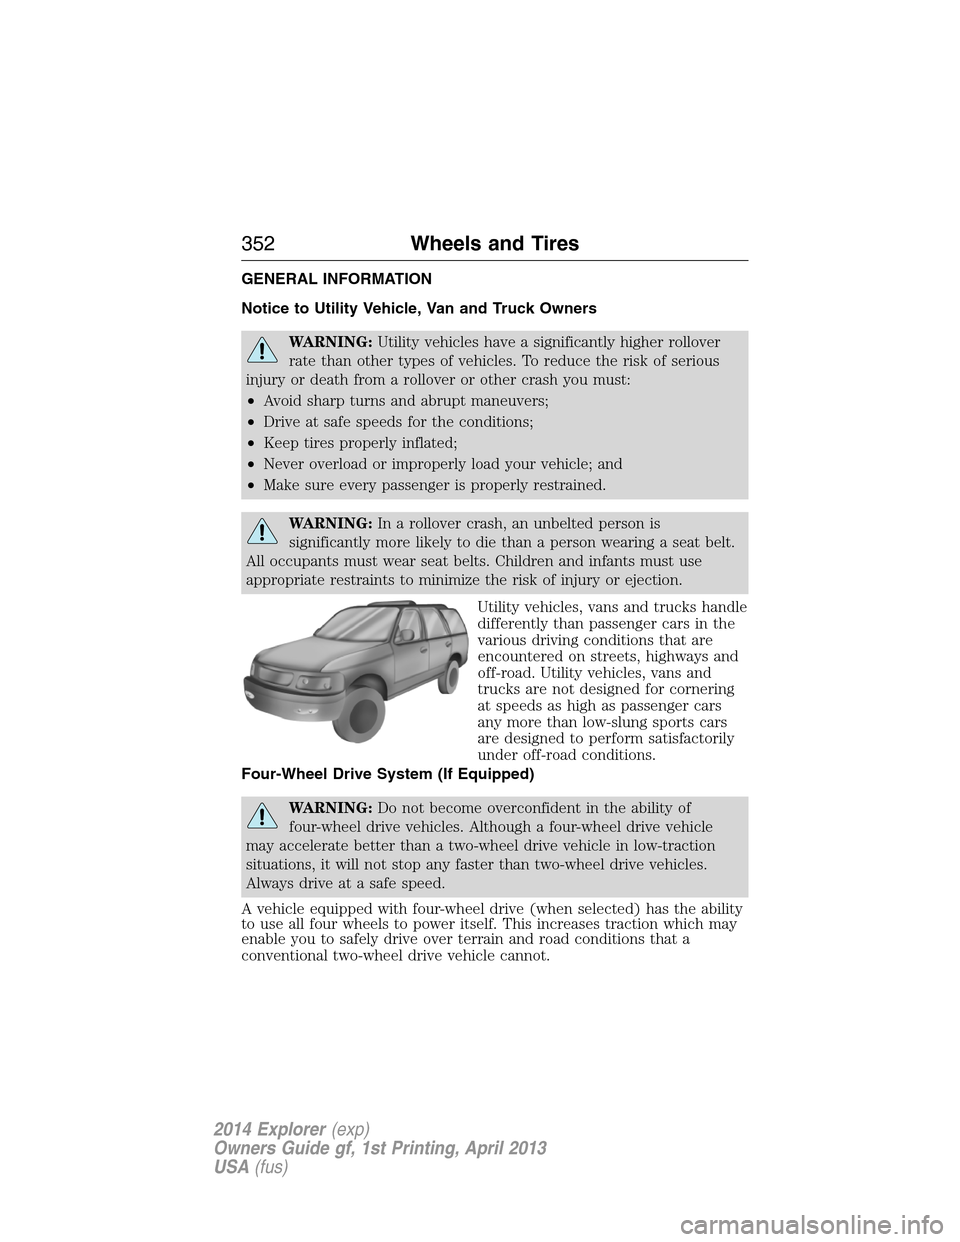 FORD EXPLORER 2014 5.G Owners Manual GENERAL INFORMATION
Notice to Utility Vehicle, Van and Truck Owners
WARNING:Utility vehicles have a significantly higher rollover
rate than other types of vehicles. To reduce the risk of serious
injur